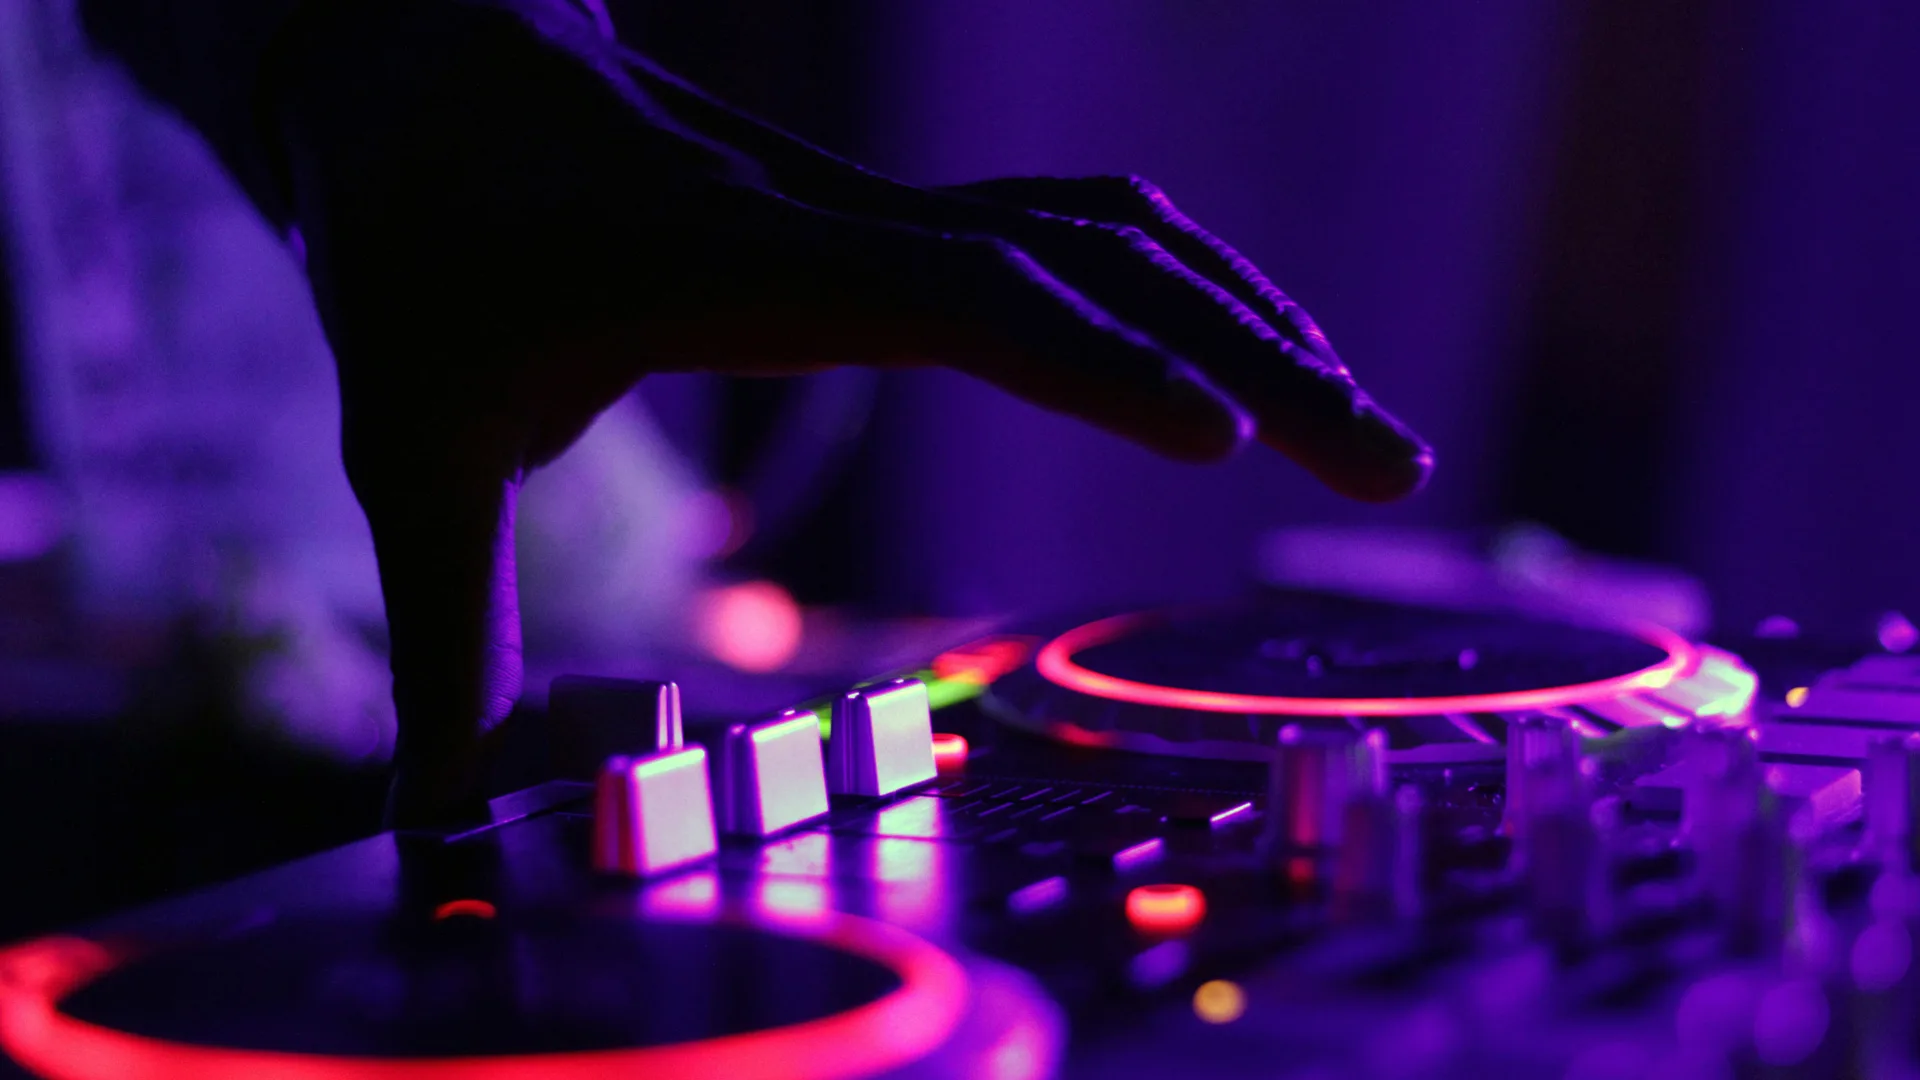 A close up photograph of DJ decks with a hand hovering over to change the buttons lit in neon purples and pinks